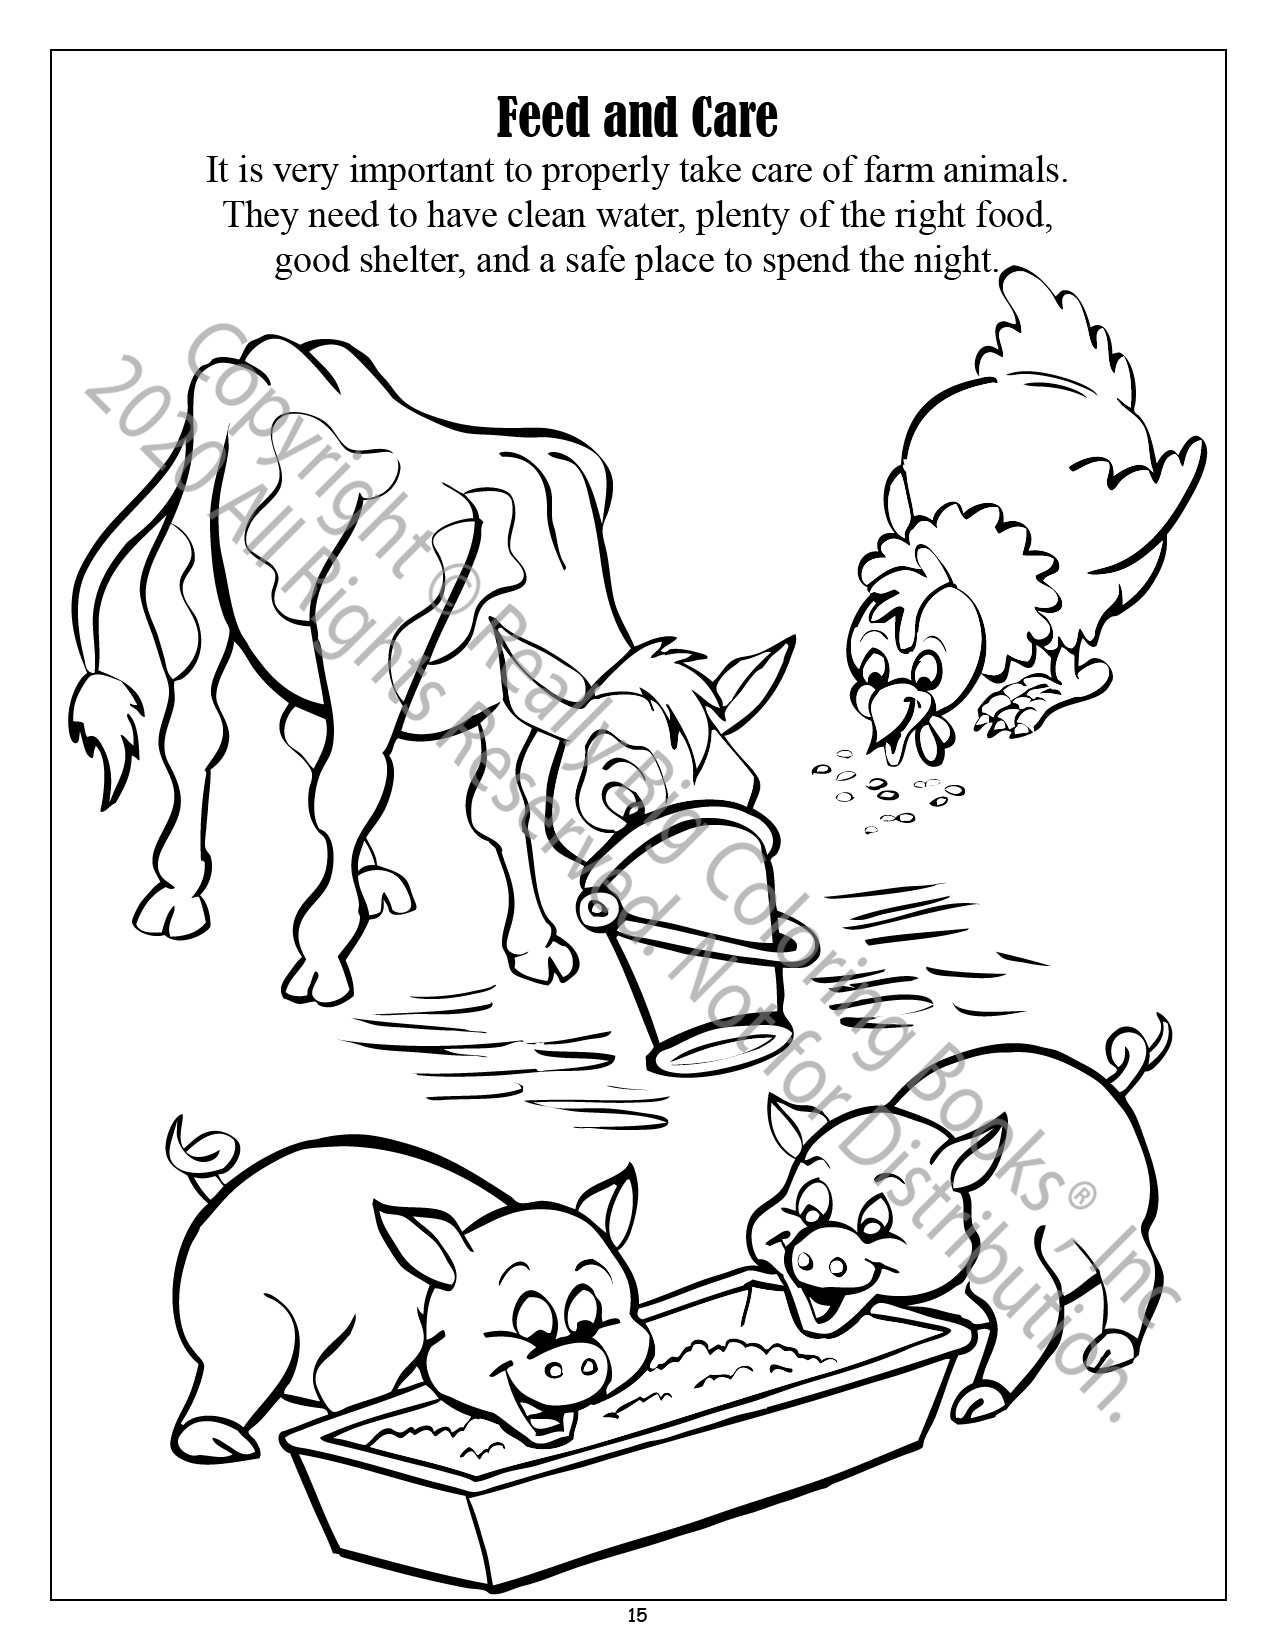 Food and Fun on the Farm Coloring Page 4